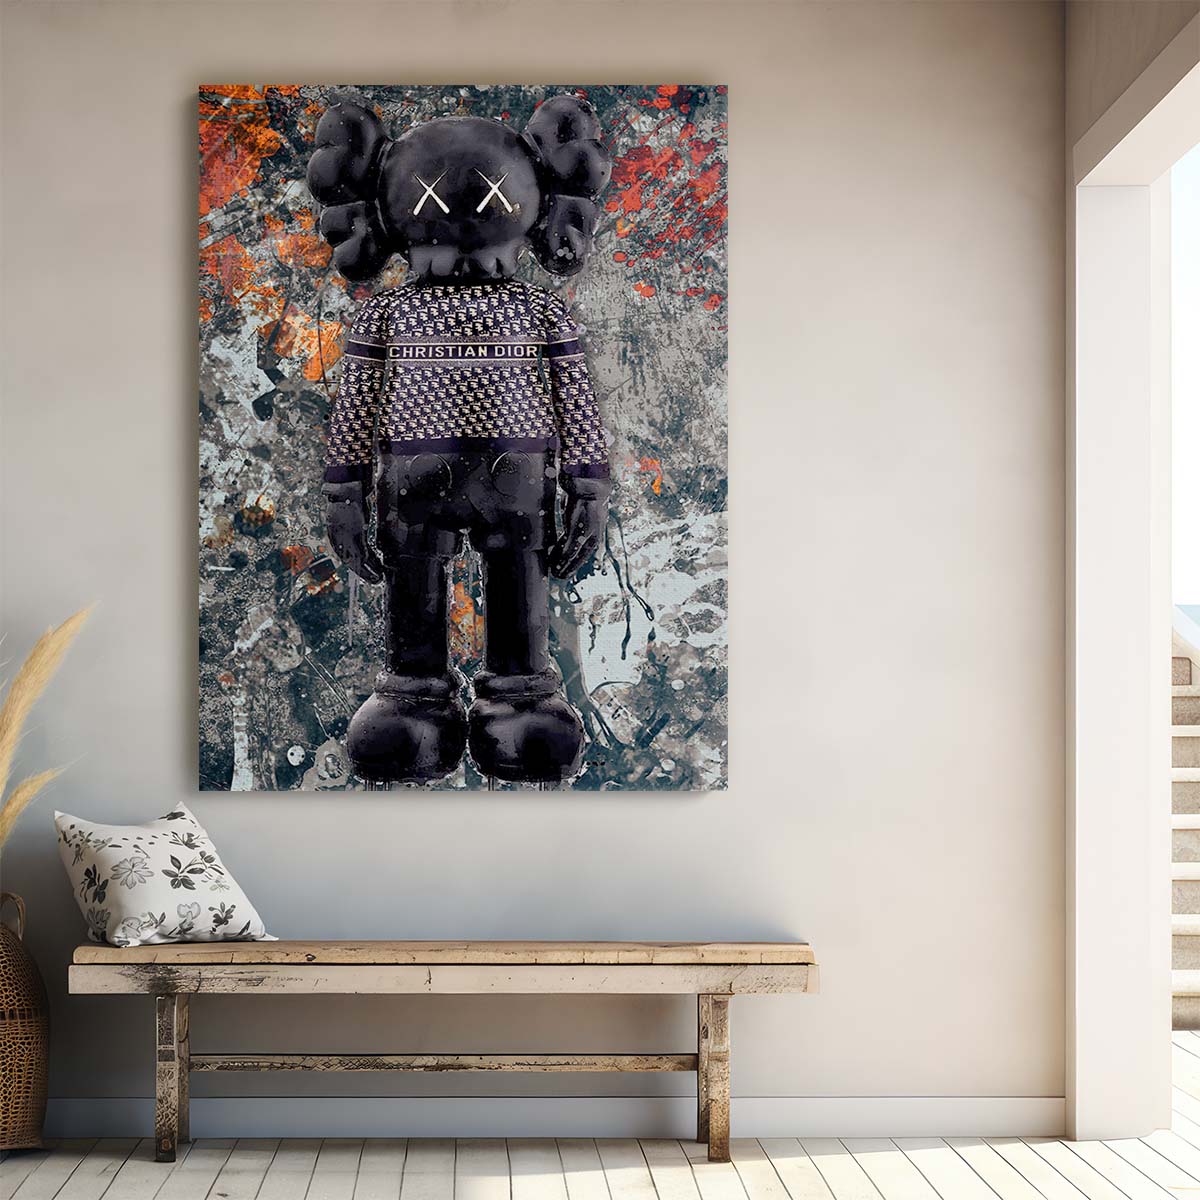 Luxury Kaws Christian Dior Skin Wall Art by Luxuriance Designs. Made in USA.